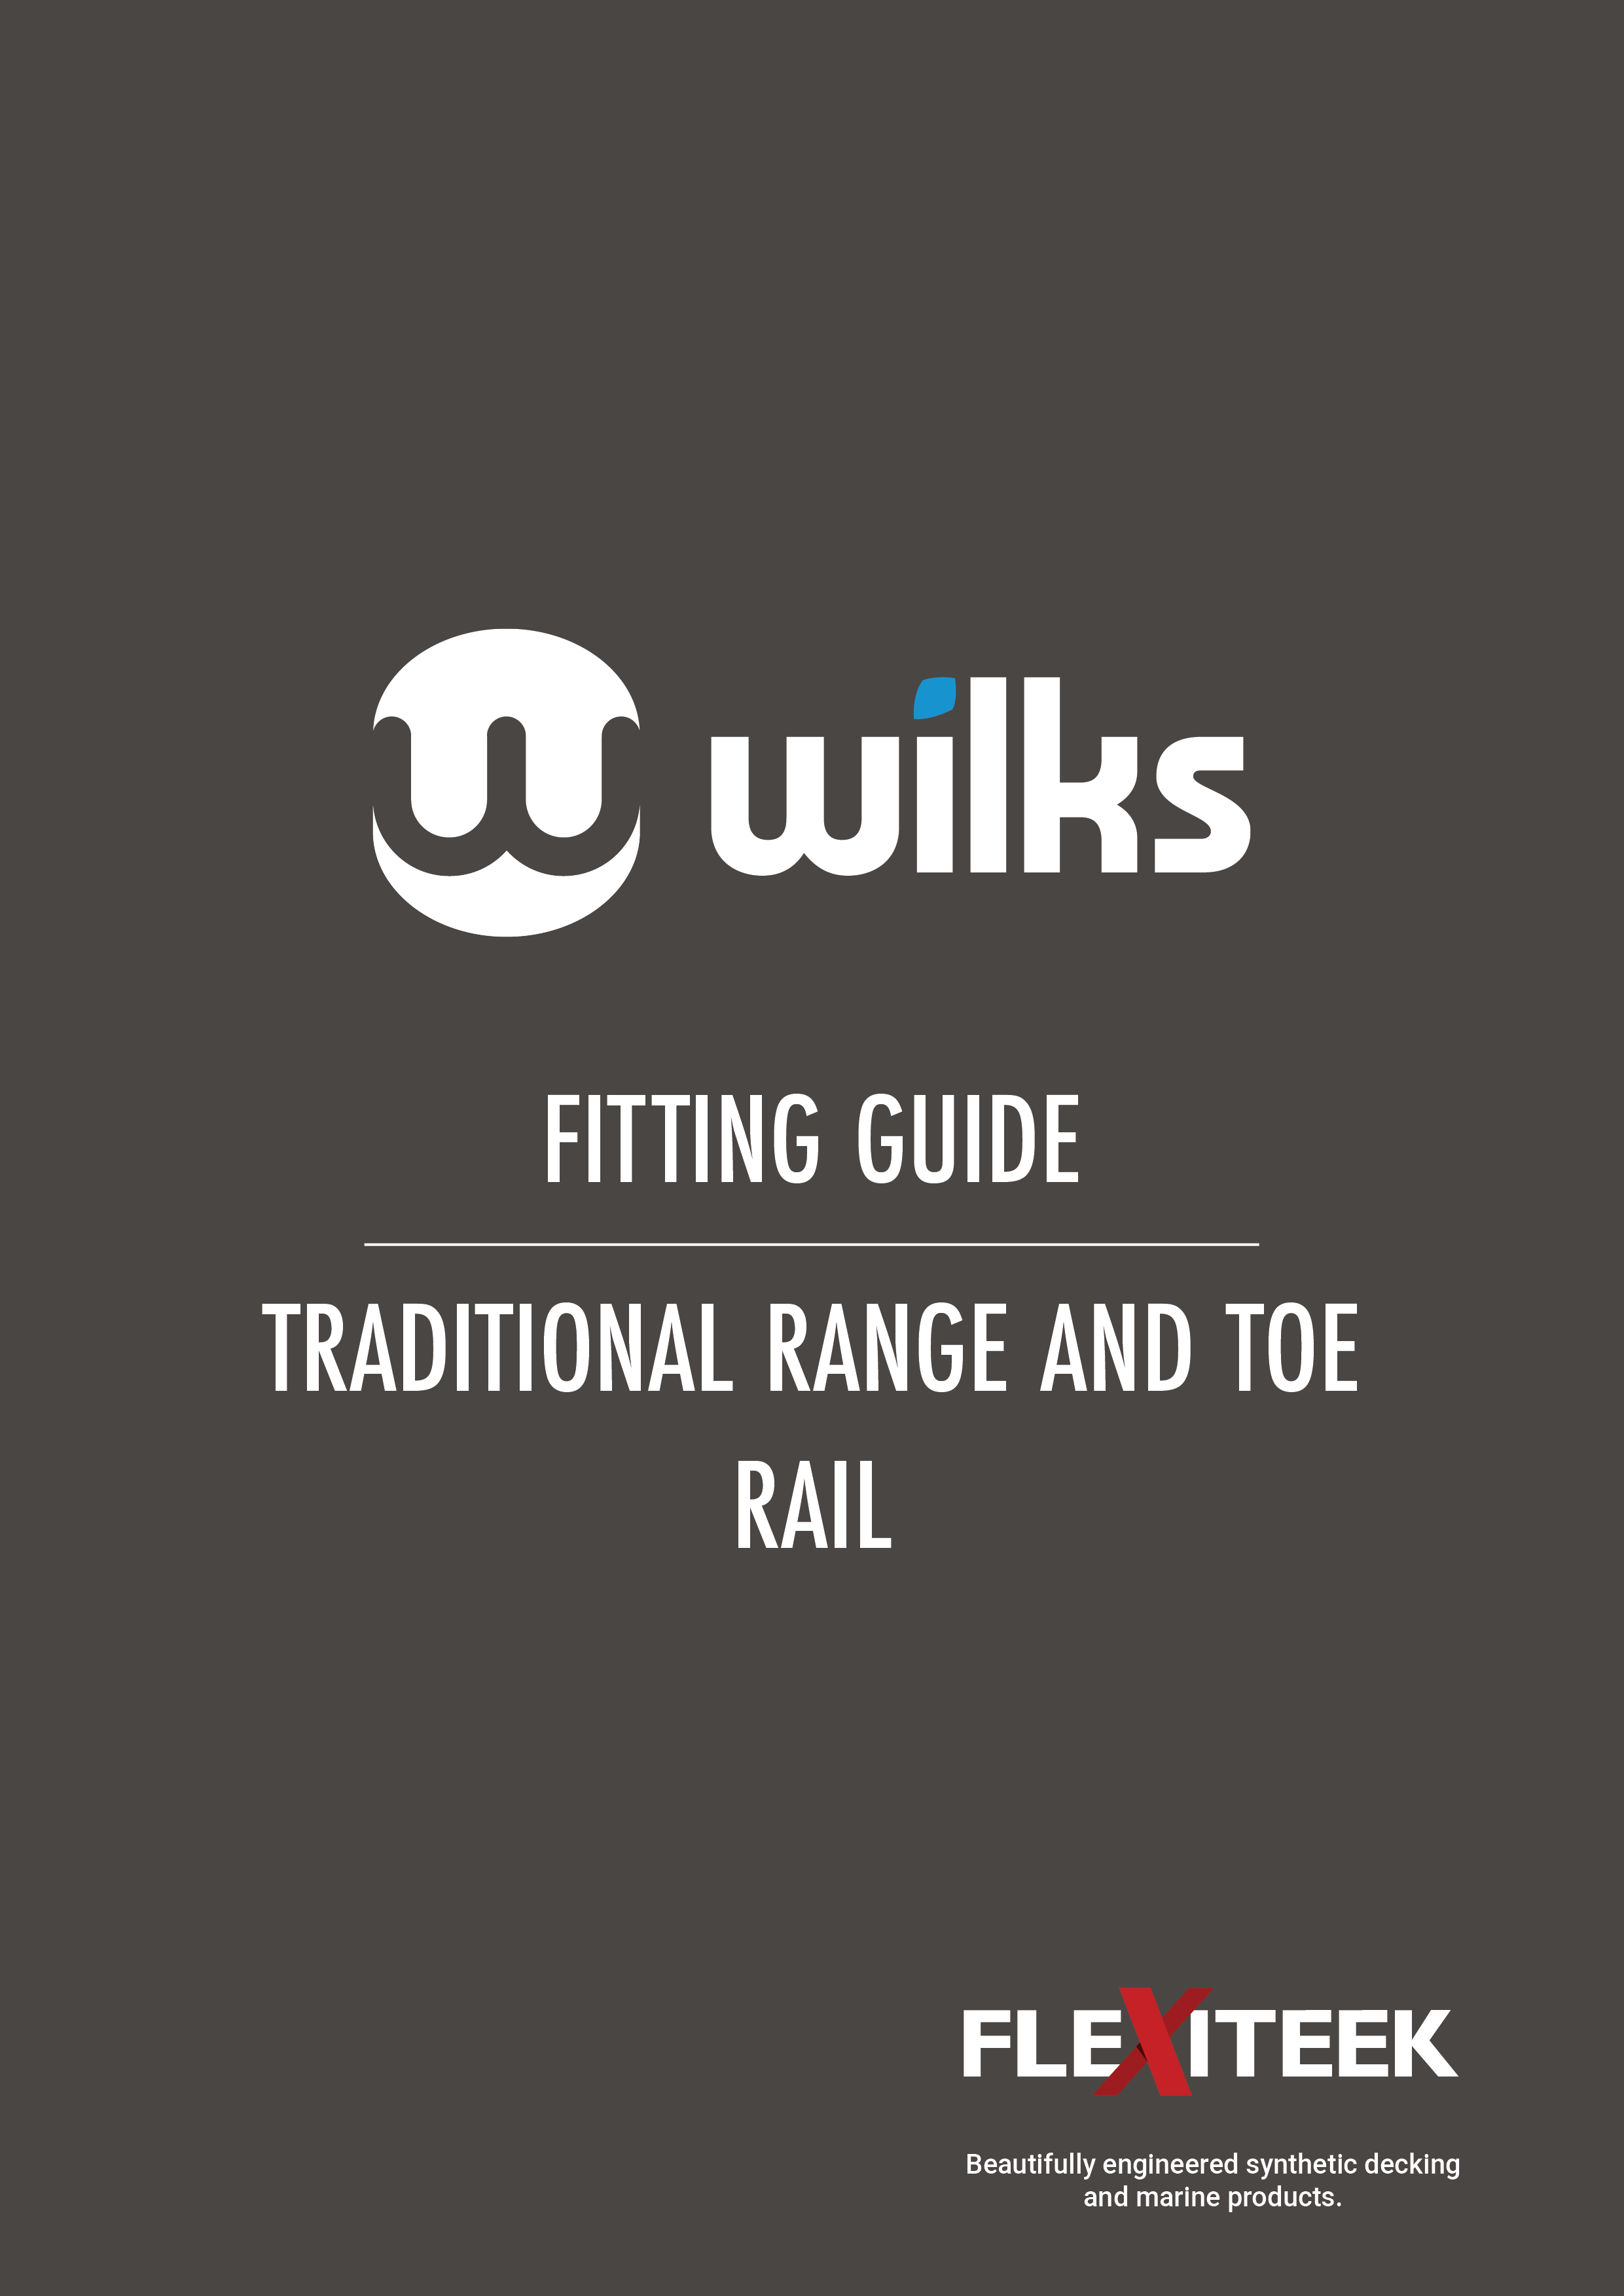 Traditional and toe rail - Fitting Guide